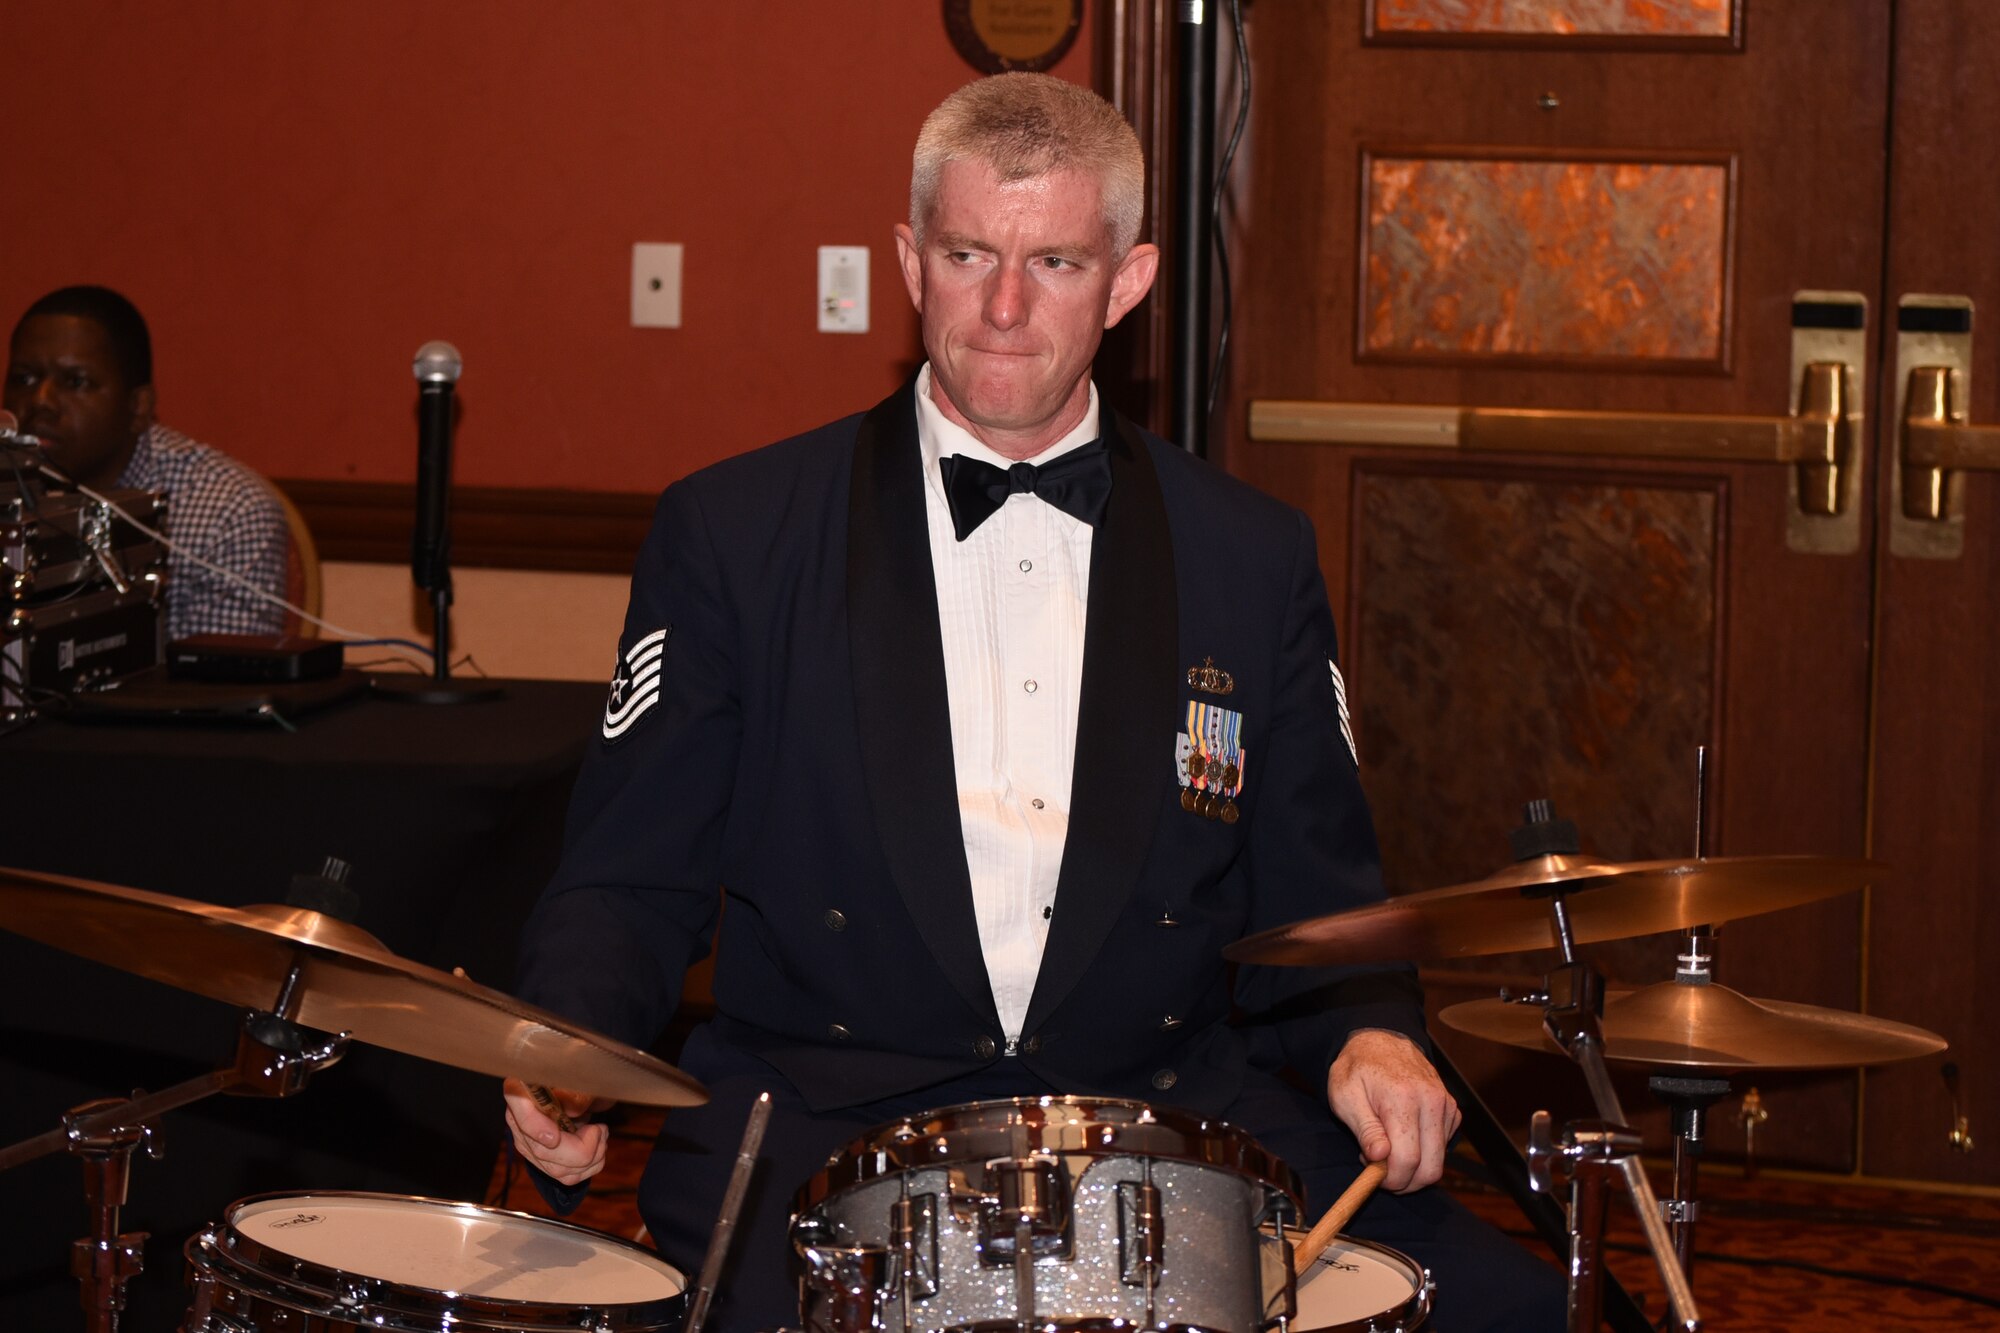 Members of the U.S. Air Force's Band of the West provided entertainment for the 2017 Air Force Ball, held Sept. 16 at the Embassy Suites Hotel in Norman, Oklahoma.